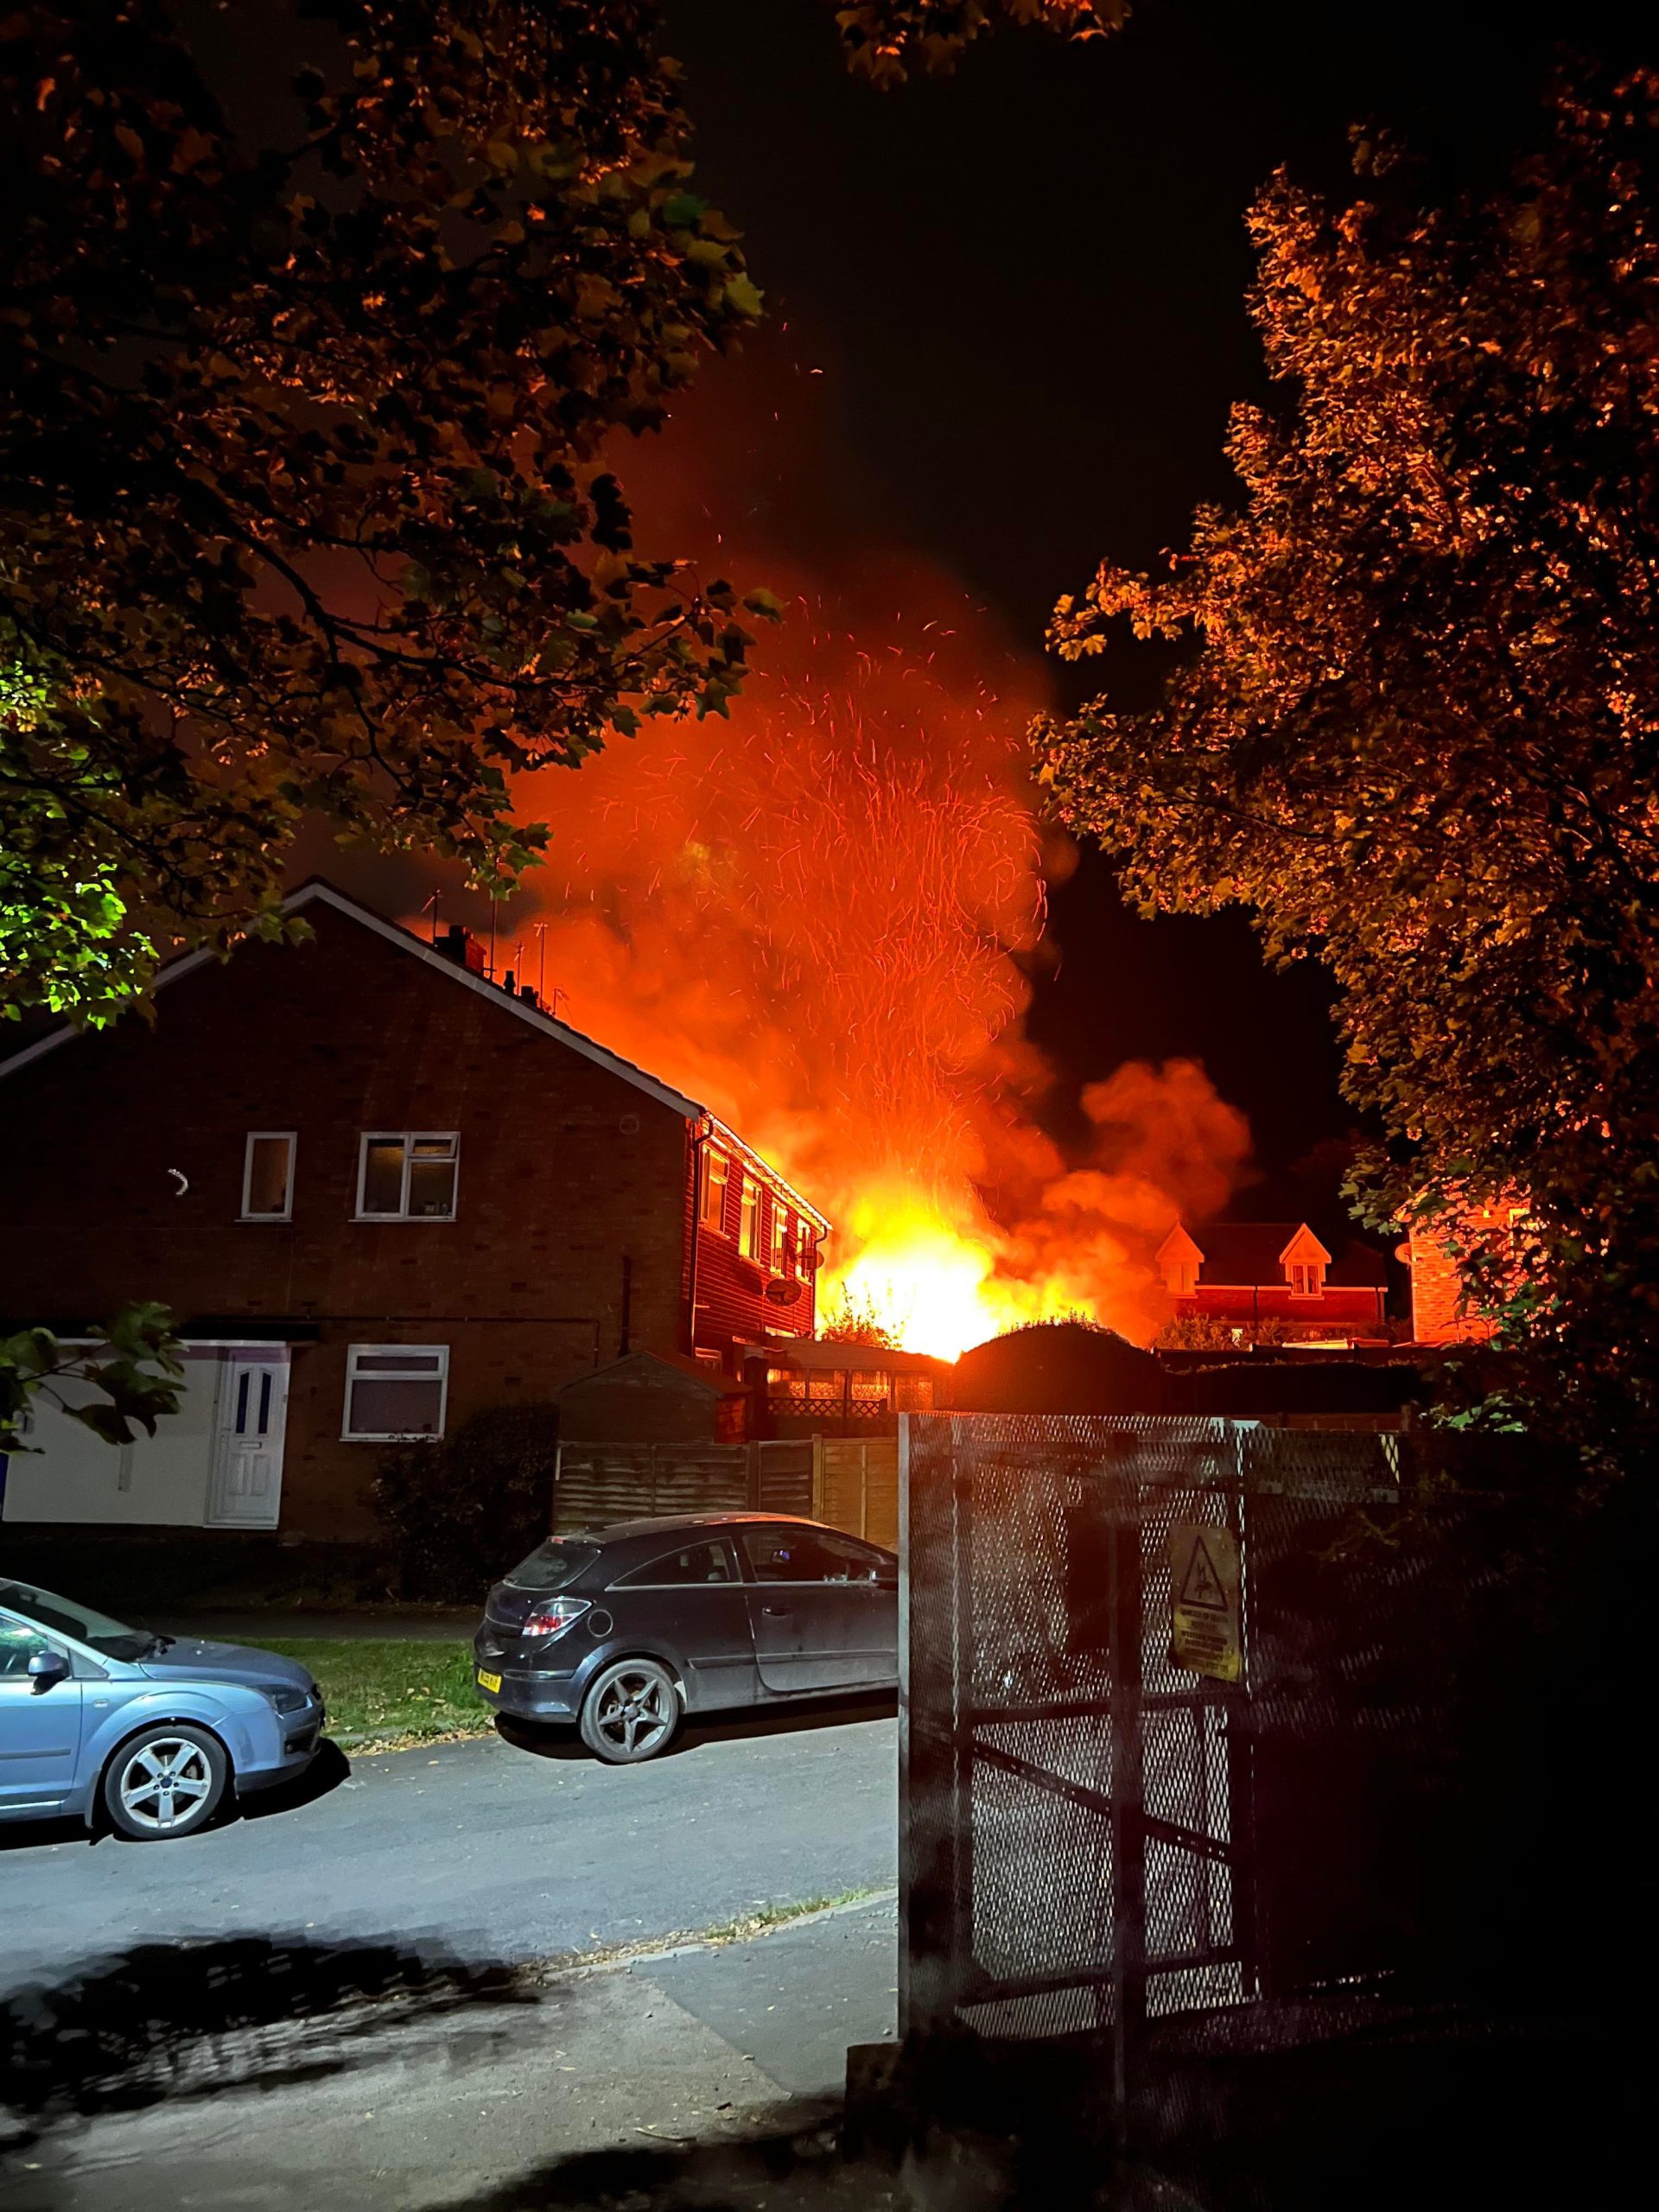 NEWS | No casualties reported after shed fire spread to a neighbouring property in Hereford overnight